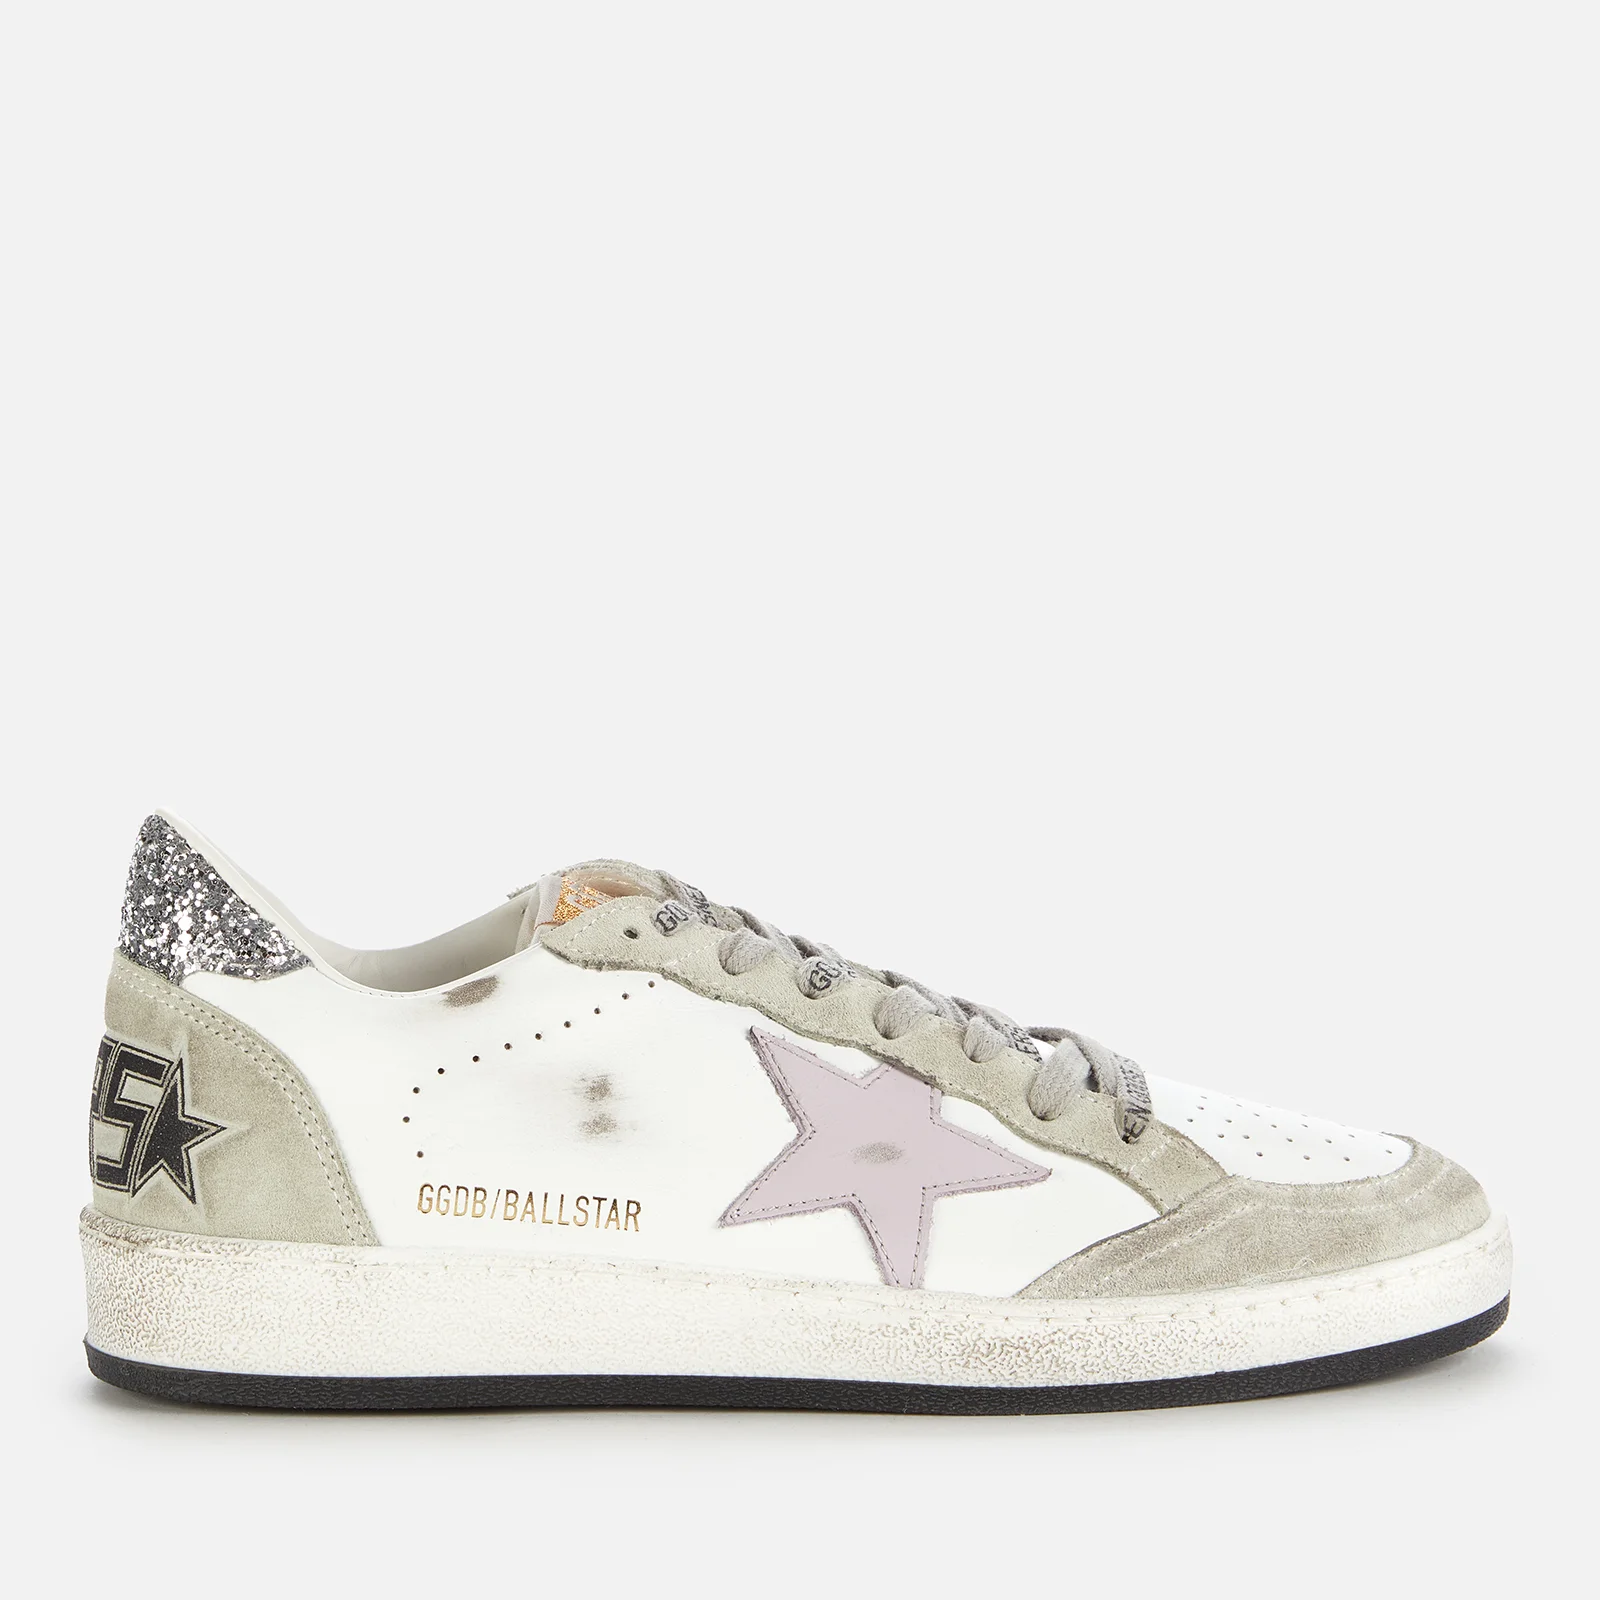 Golden Goose Women's Ball Star Leather Trainers - White/Lilac/Oil Green Image 1